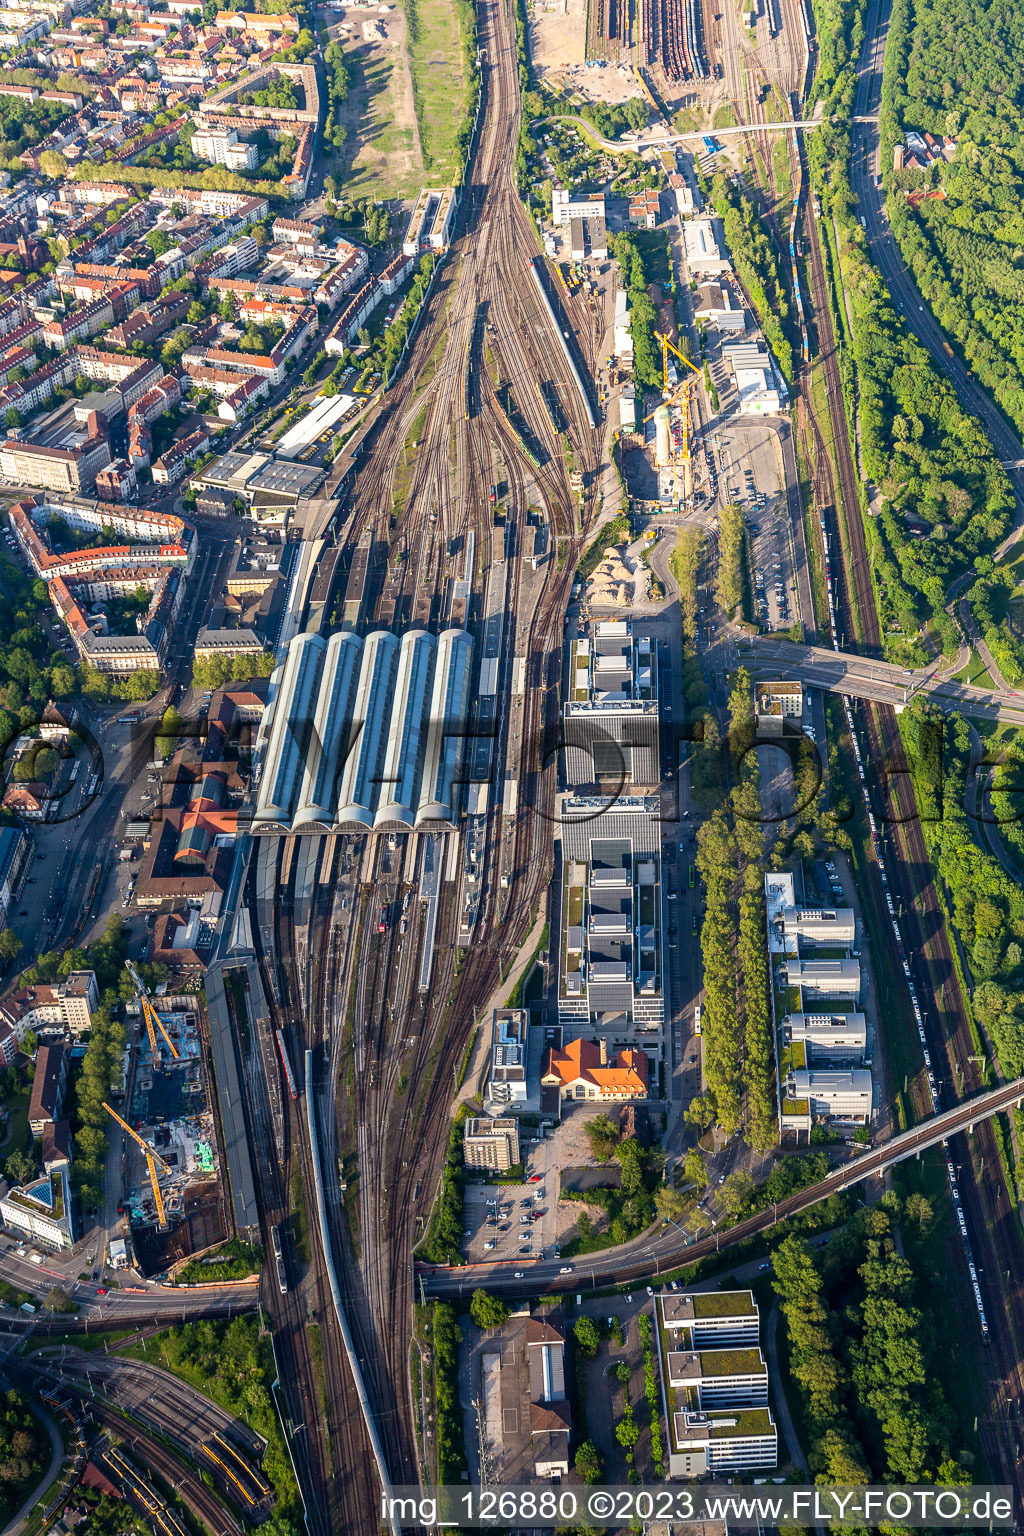 Aerial photograpy of Track progress and building of the main station of the railway in the district Suedweststadt in Karlsruhe in the state Baden-Wurttemberg, Germany